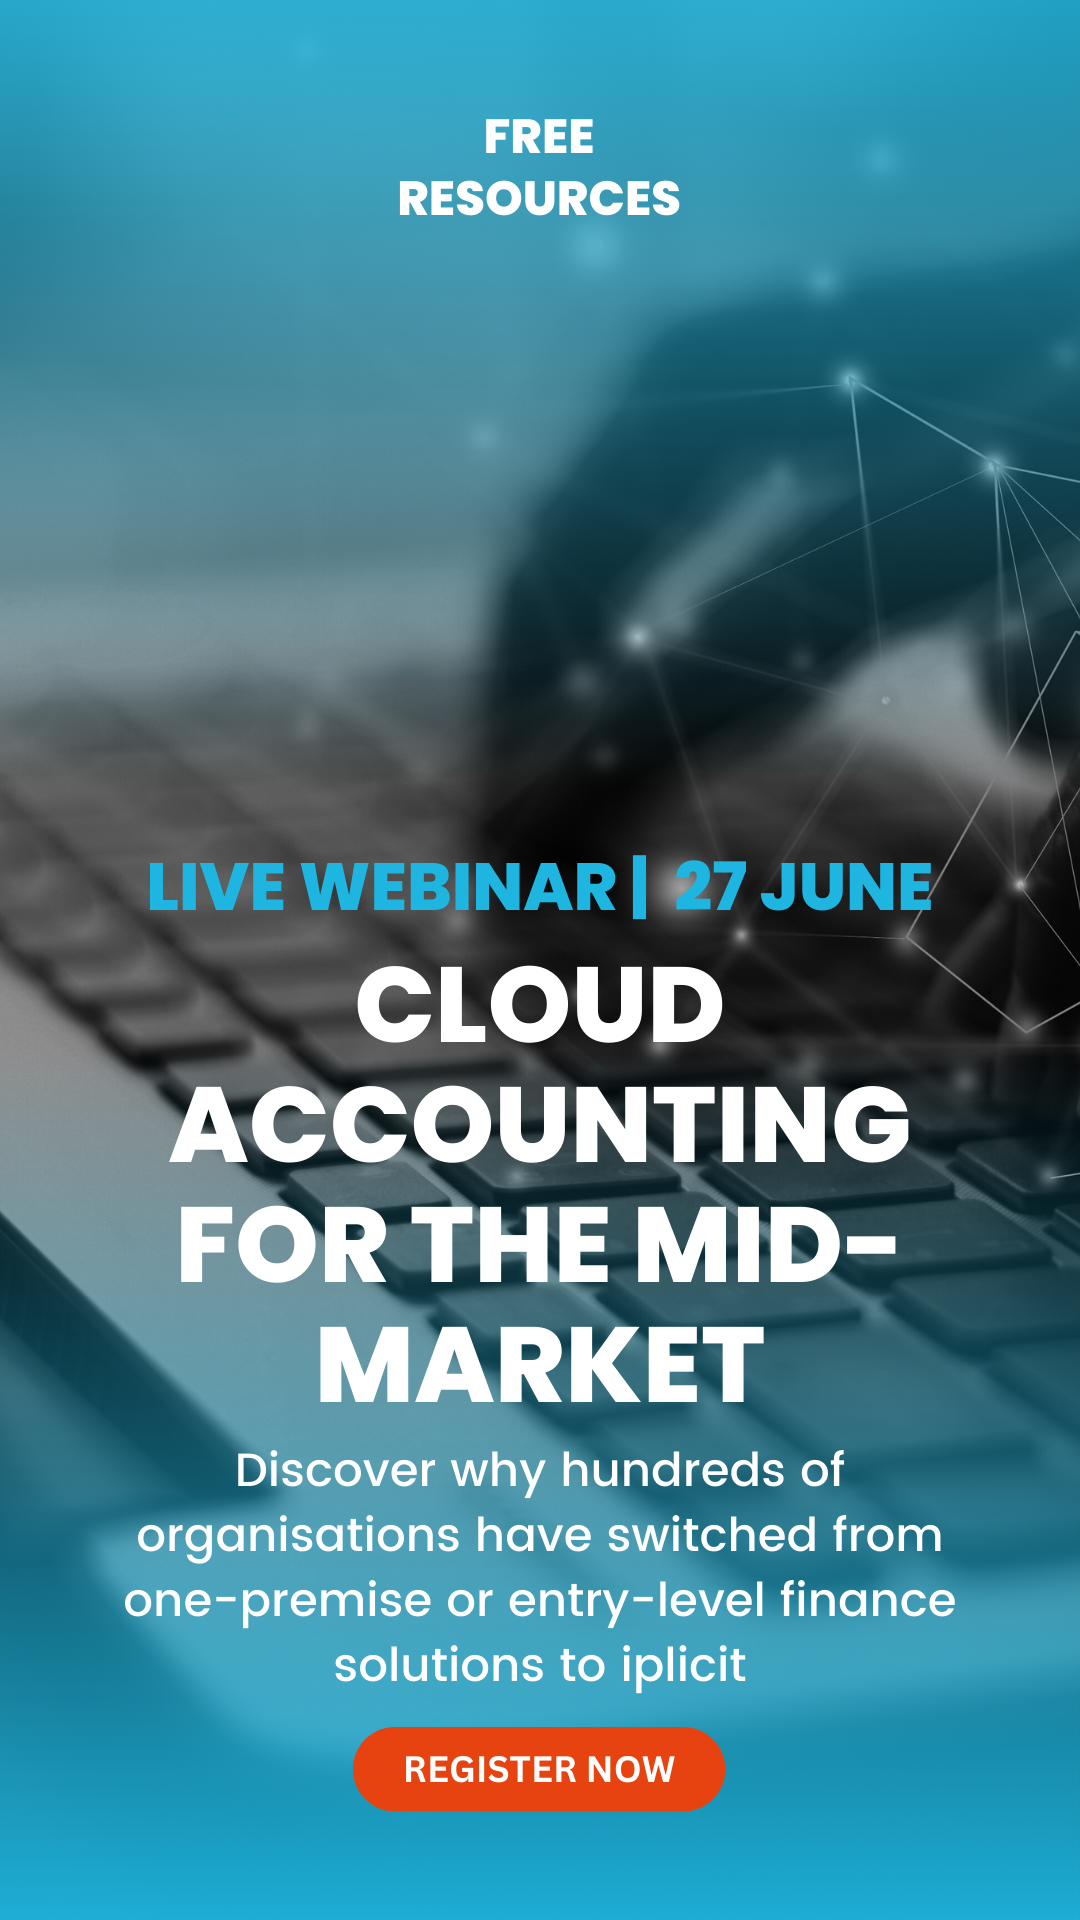 Cloud Accounting for the mid-market